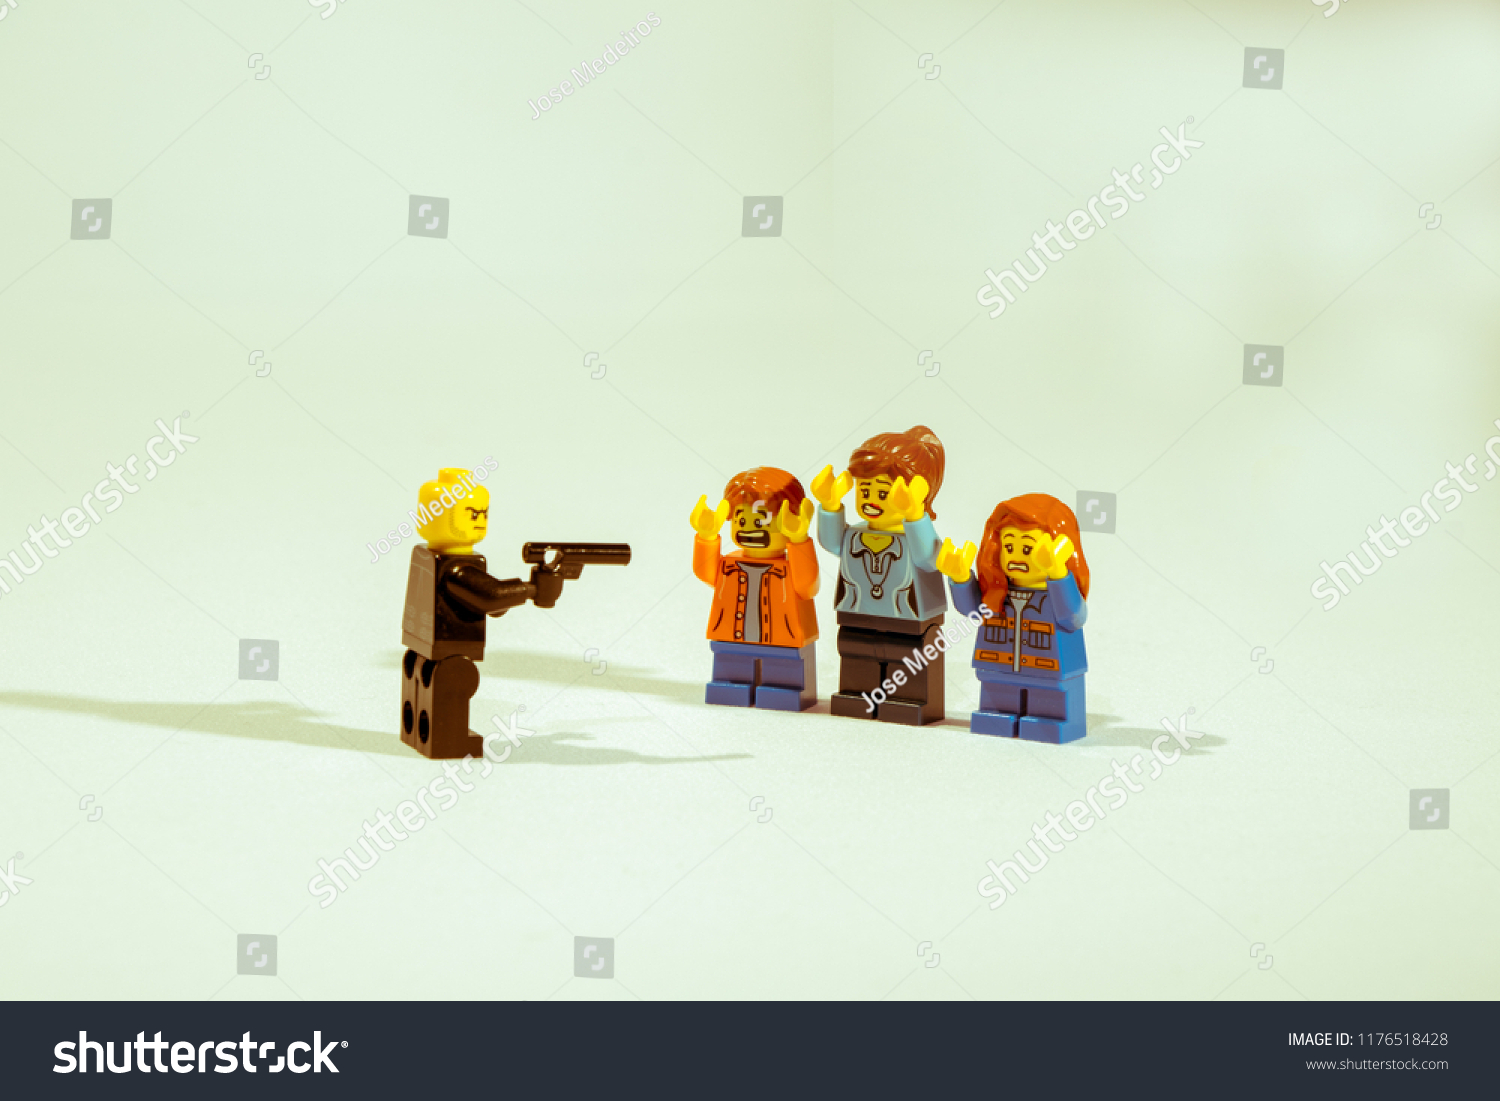 Georgia, USA - Sep 07, 2018: People or Family being mugged or robbery concept. Mini figures mugging up or arresting. Lego is a popular brand of mini figures. Lego Company is based in Denmark. #1176518428